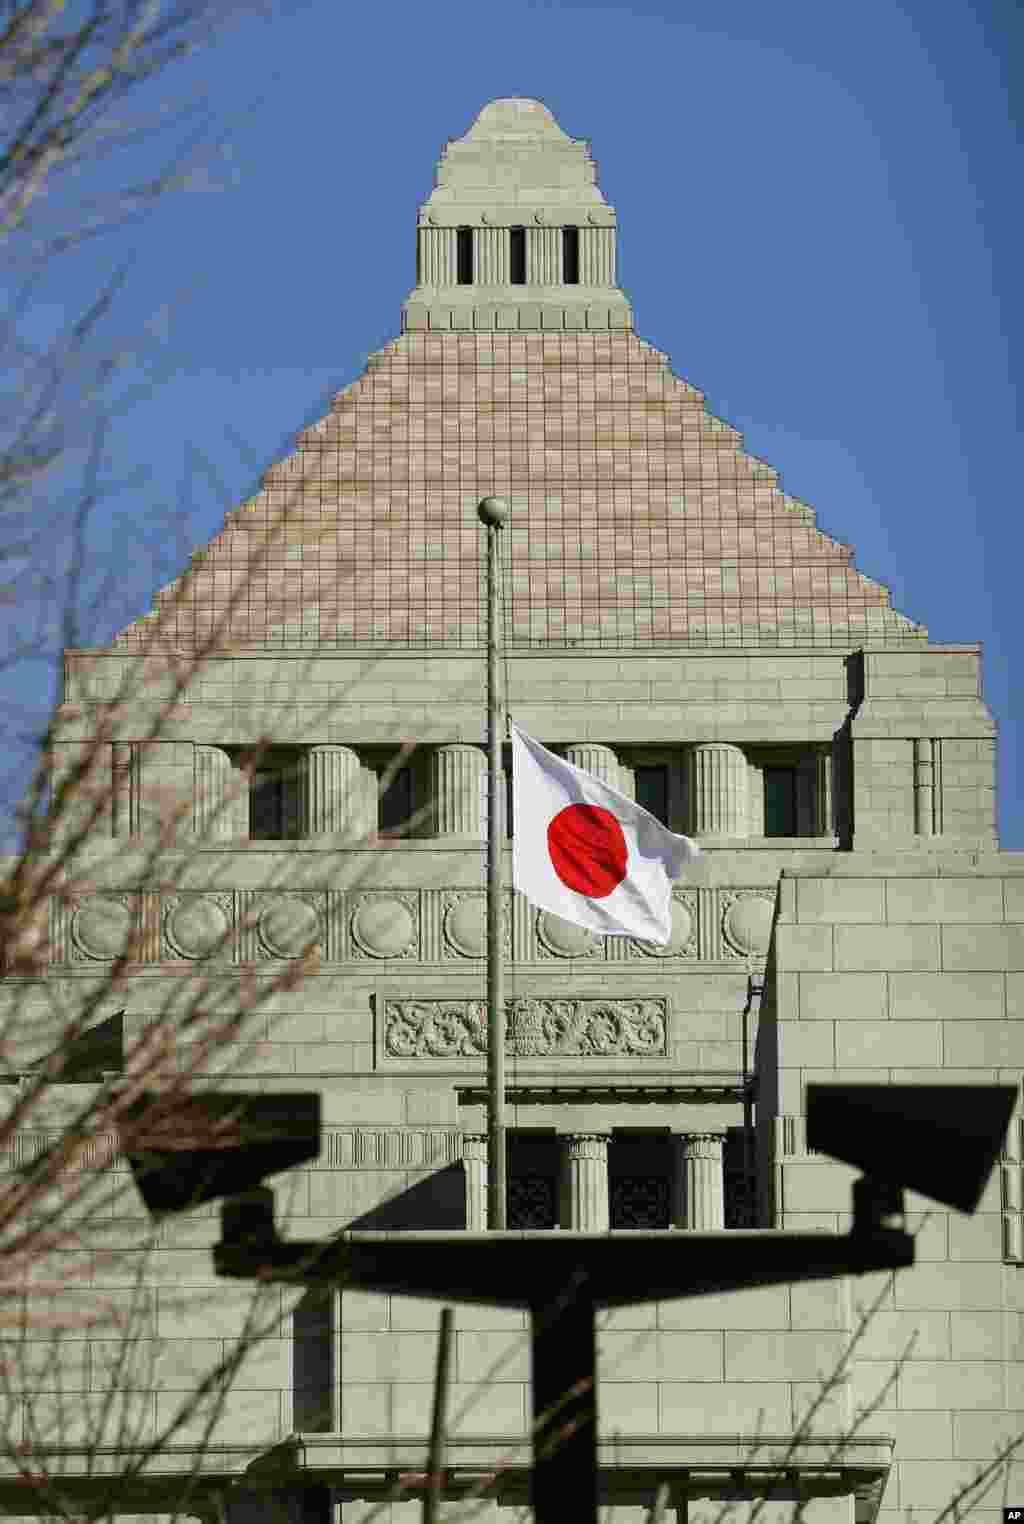 Japan&#39;s national flag flies at half-staff to mourn victims of the March 11, 2011 earthquake and tsunami, at the Parliament building in Tokyo, March 11, 2015.